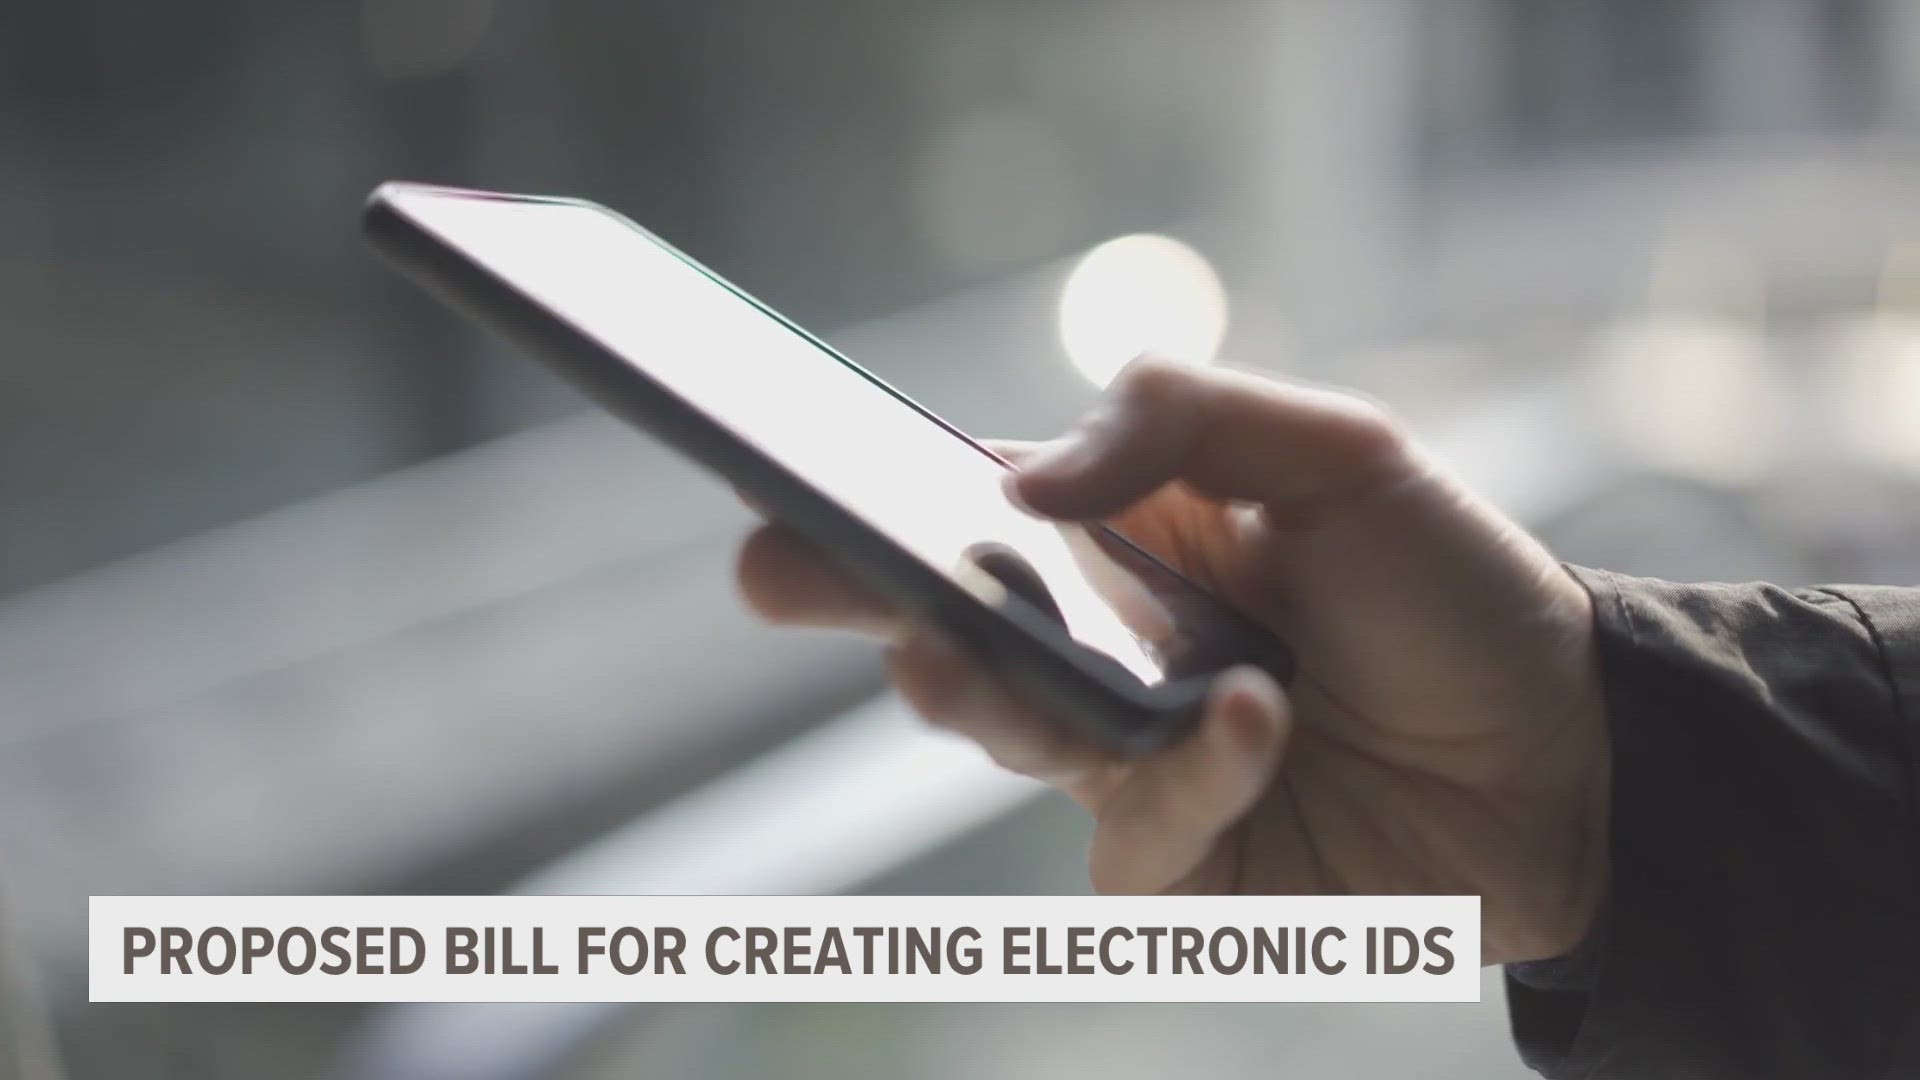 A bill has been proposed for people to be able to have electronic drivers licenses.